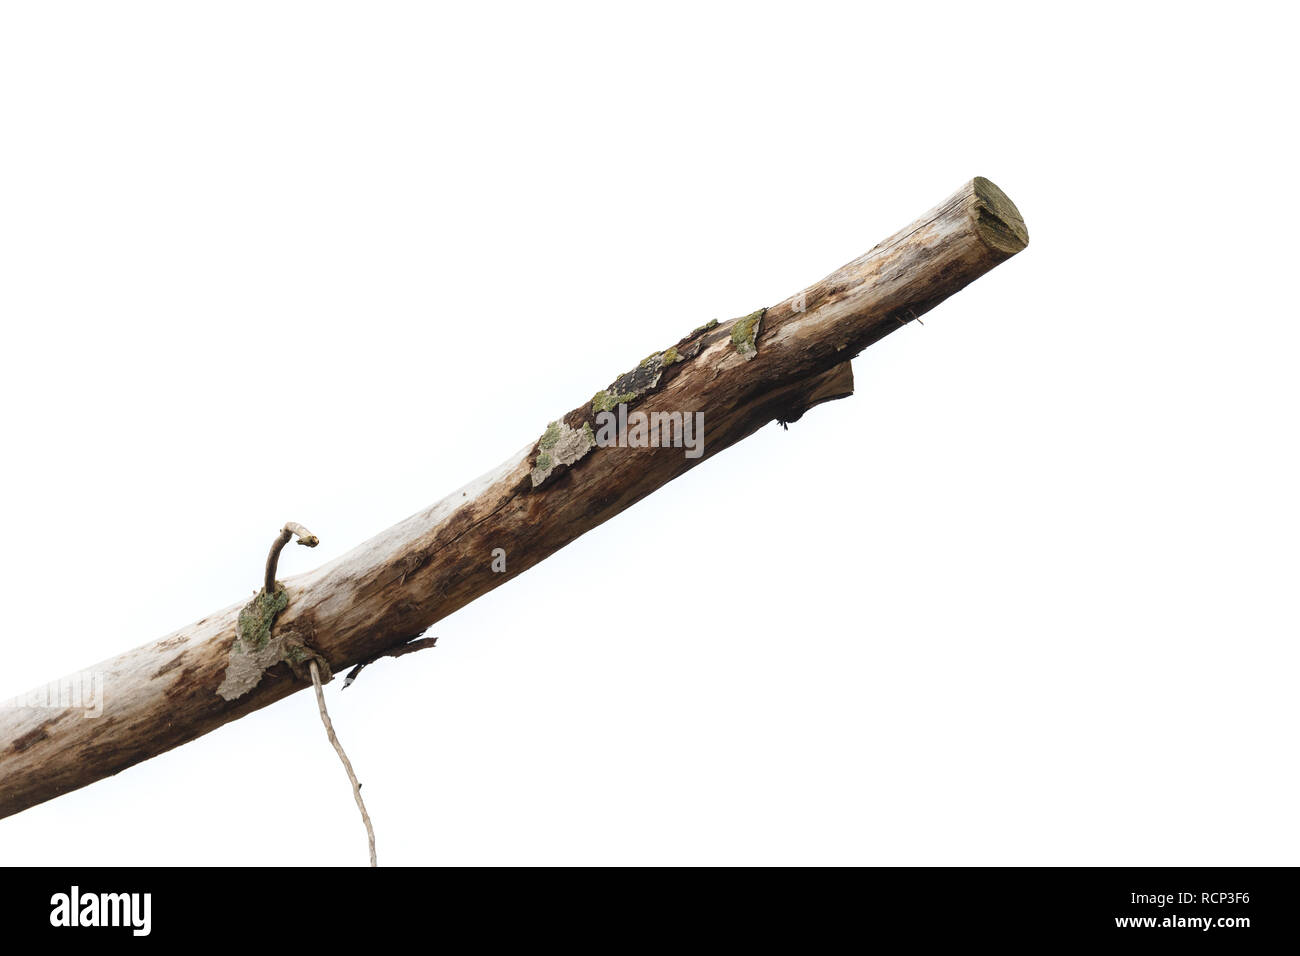 Dry tree branch isolated on white background. Stock Photo